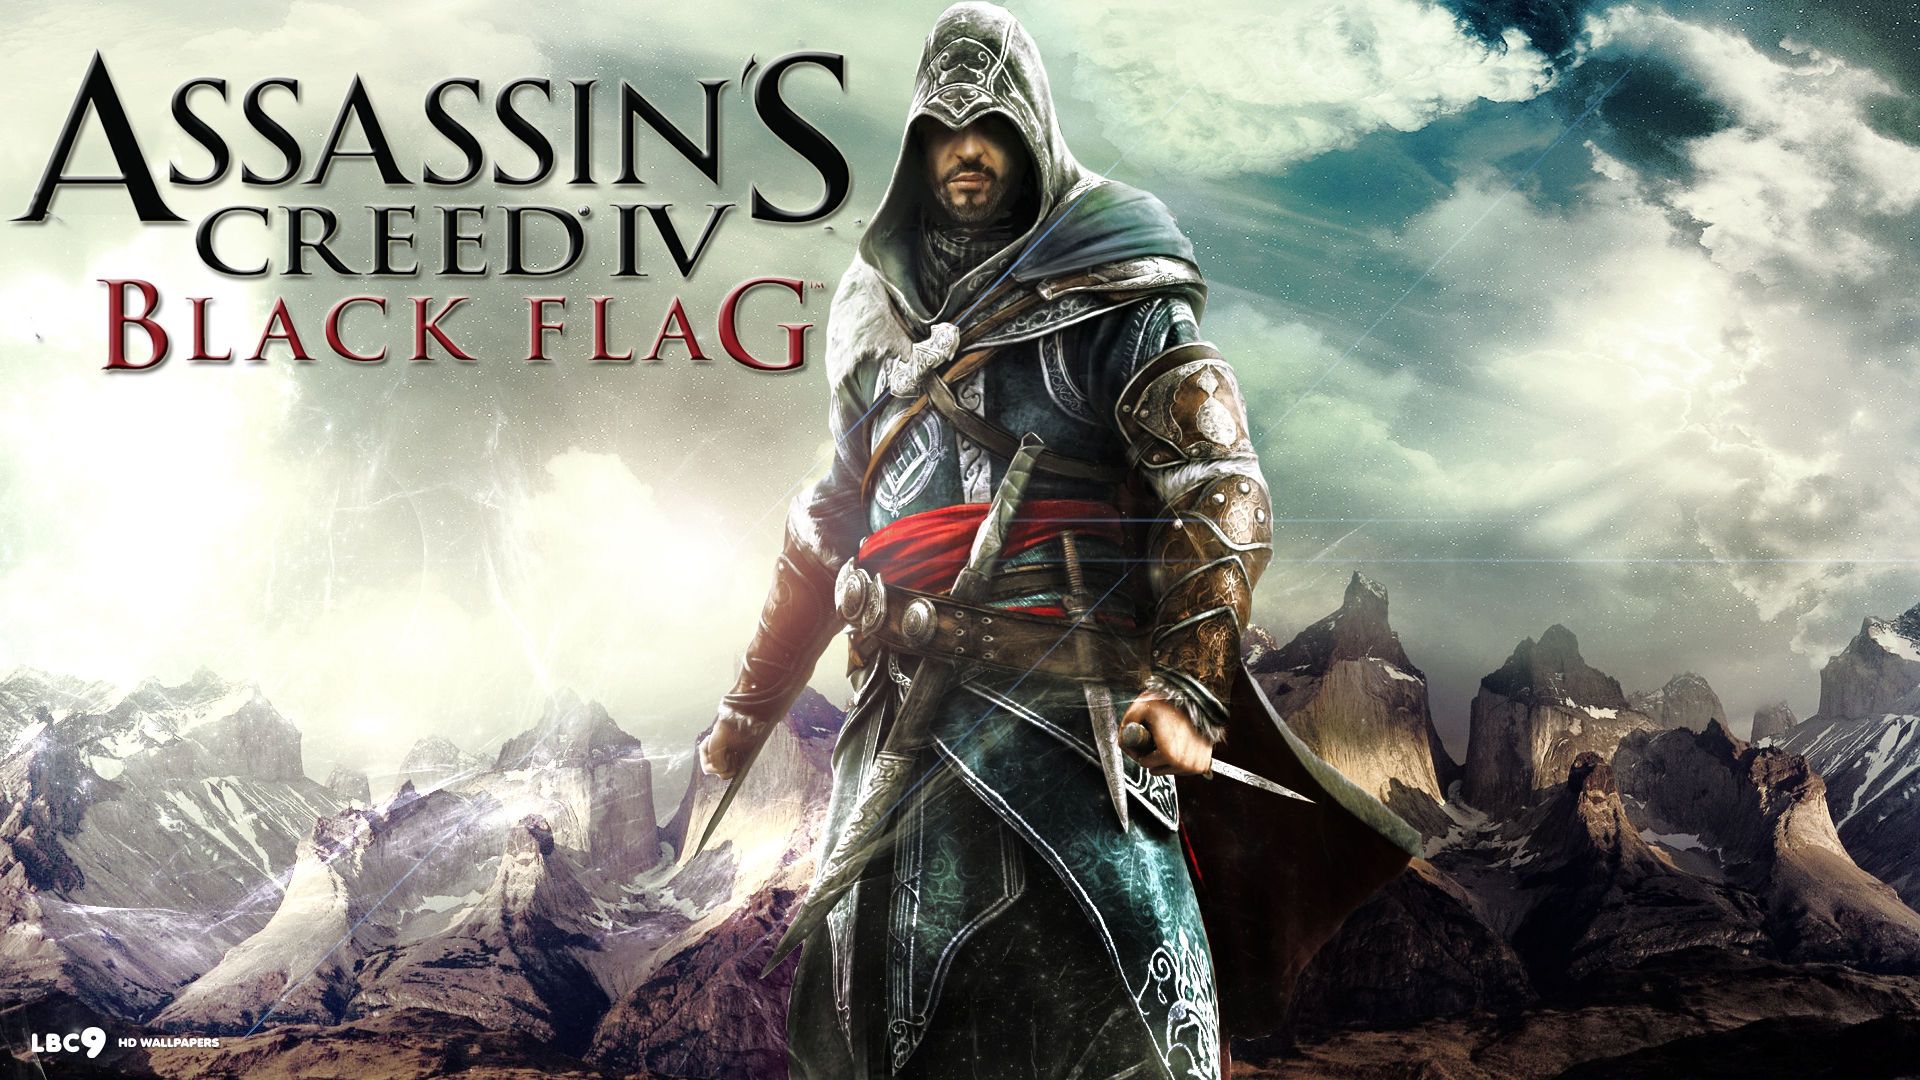 Assassin's Creed Iv